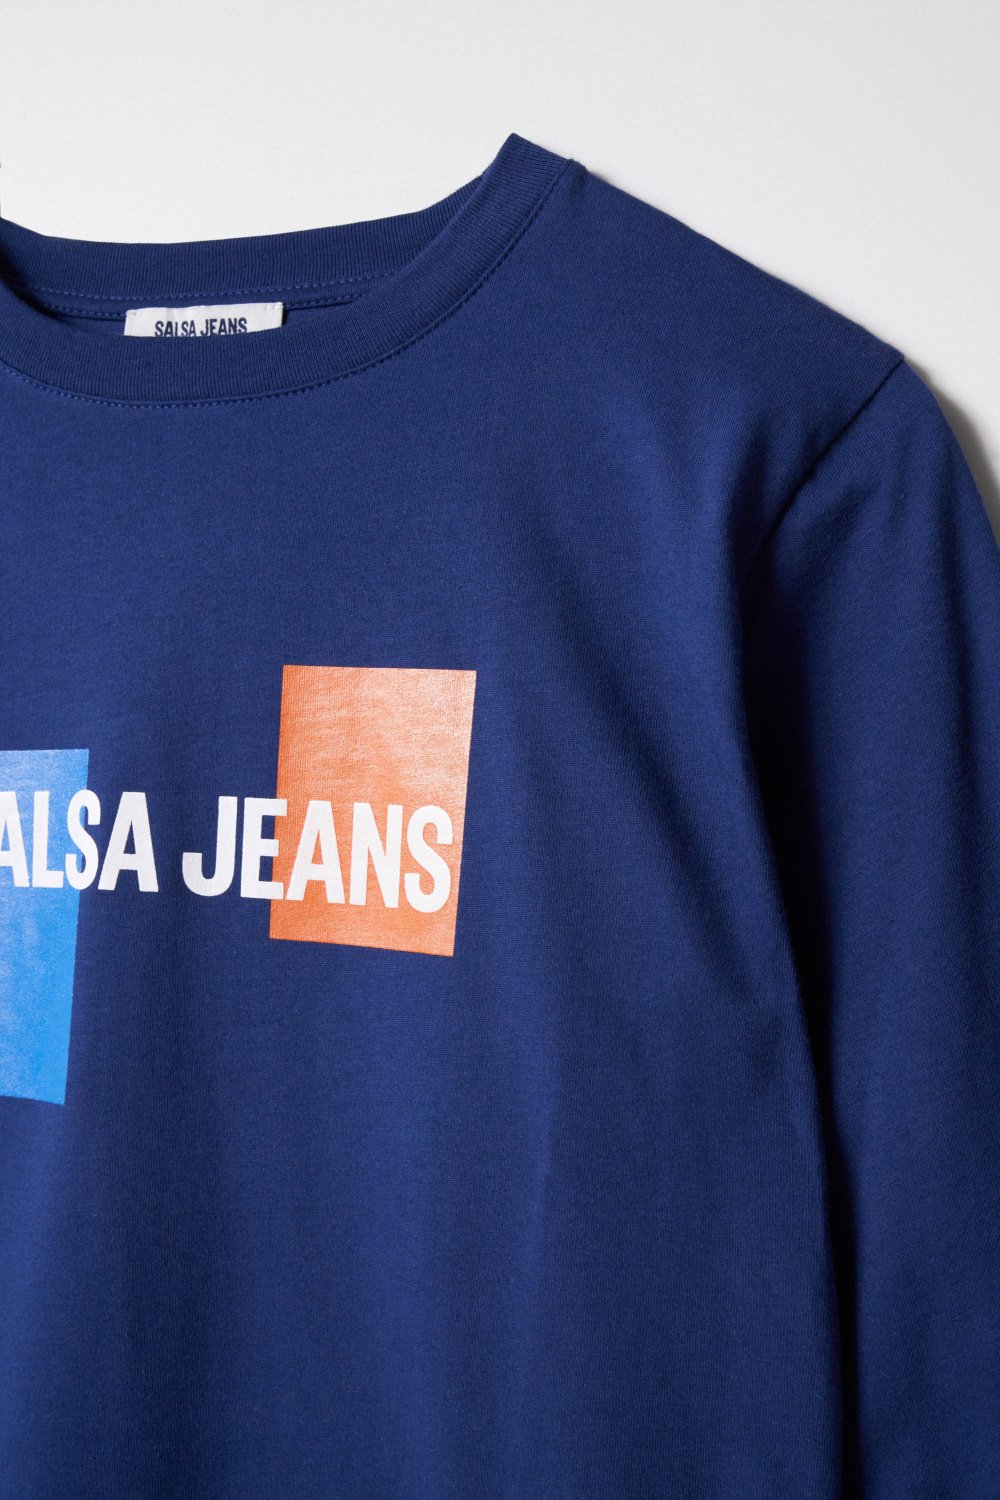 Limited edition jumper for boys with Salsa logo - Salsa